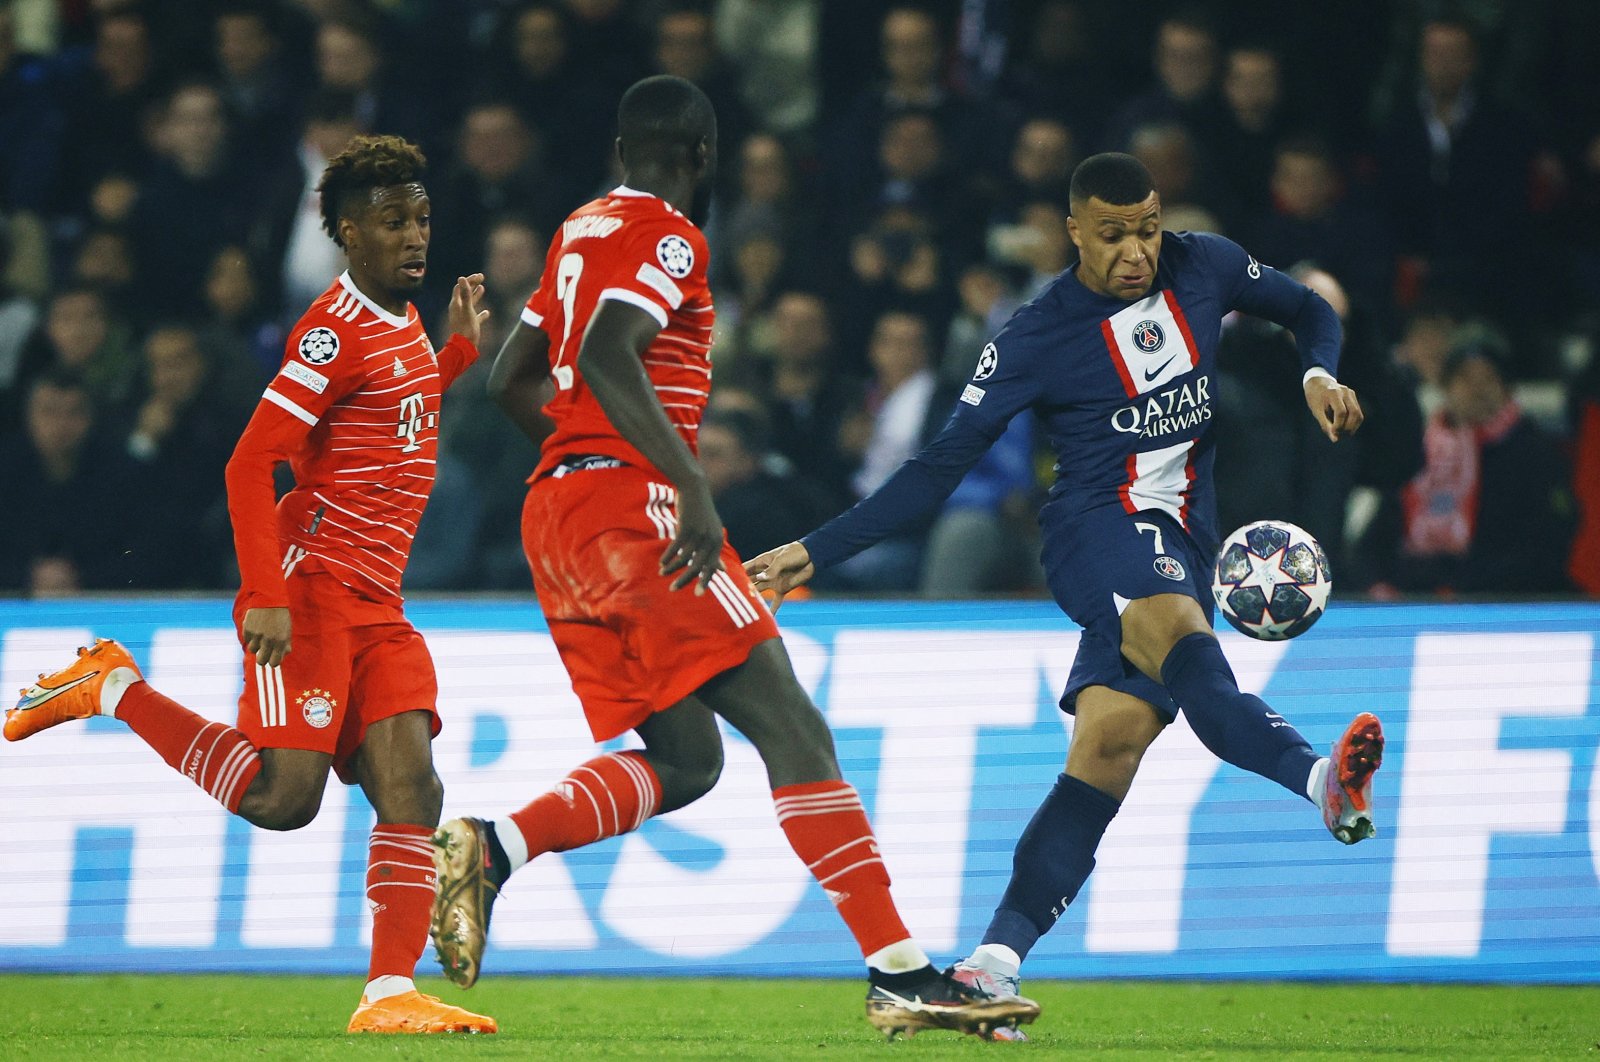 Paris St Germain&#039;s Kylian Mbappe in action with Bayern Munich&#039;s Kingsley Coman and Dayot Upamecano in UEFA Champions League round of 16 tie at Parc des Princes, Paris, France, Feb.14, 2023. (Reuters Photo)